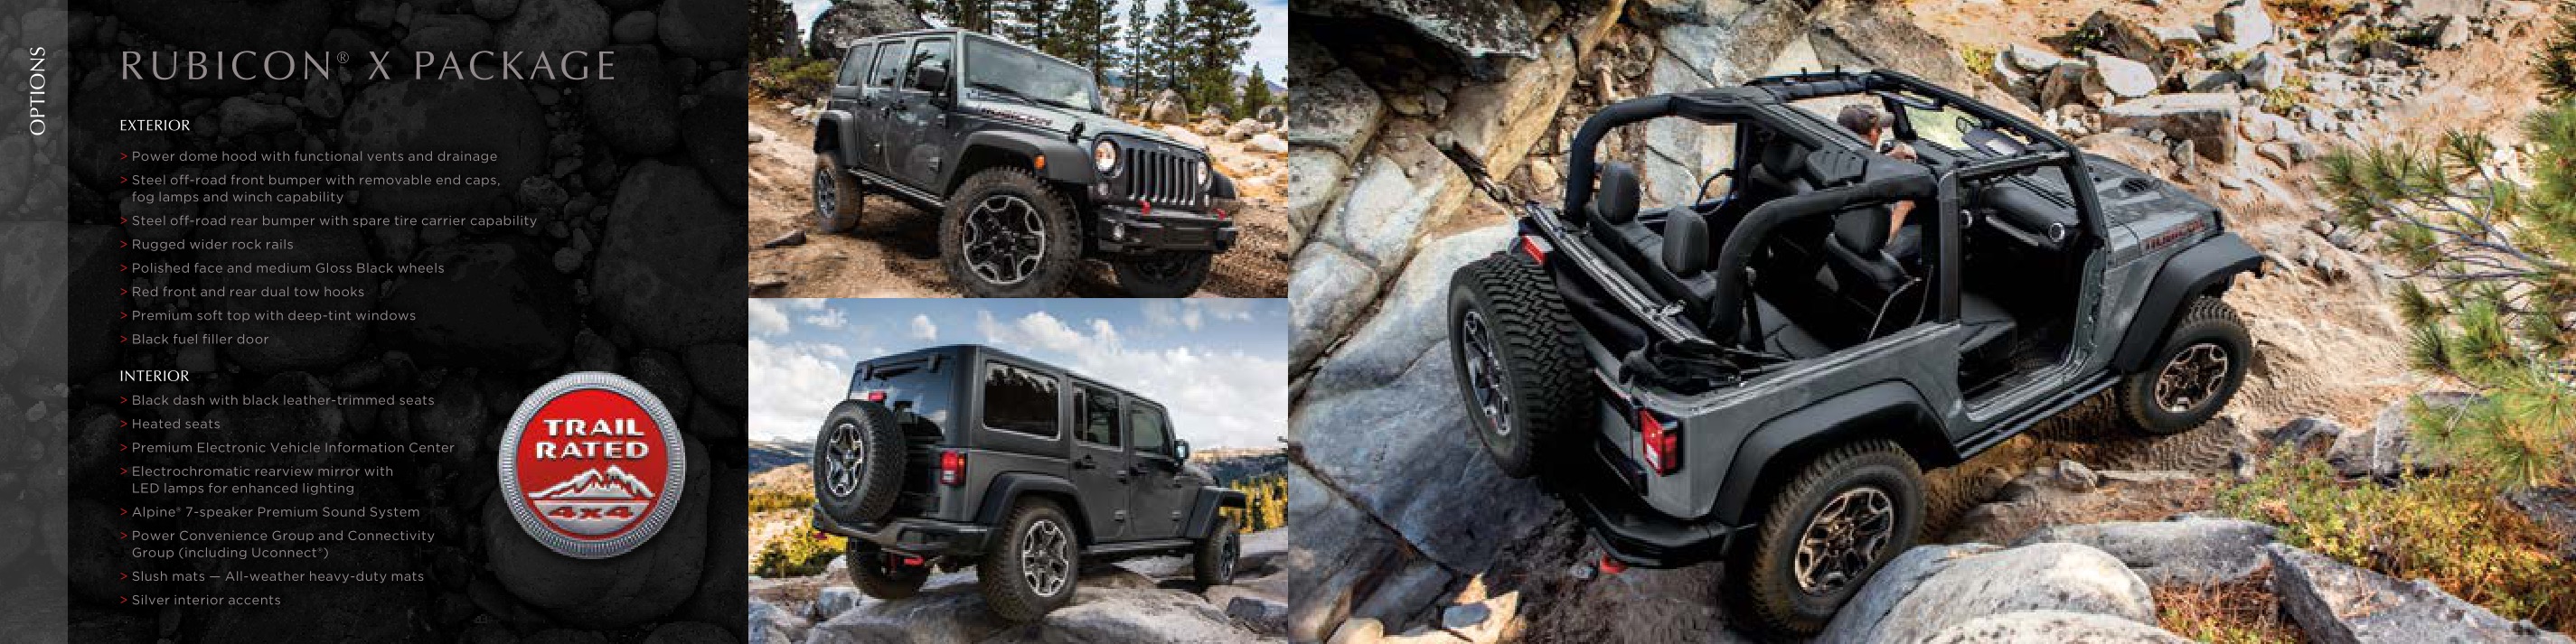 2014 Jeep Wrangler Specifications Page 4